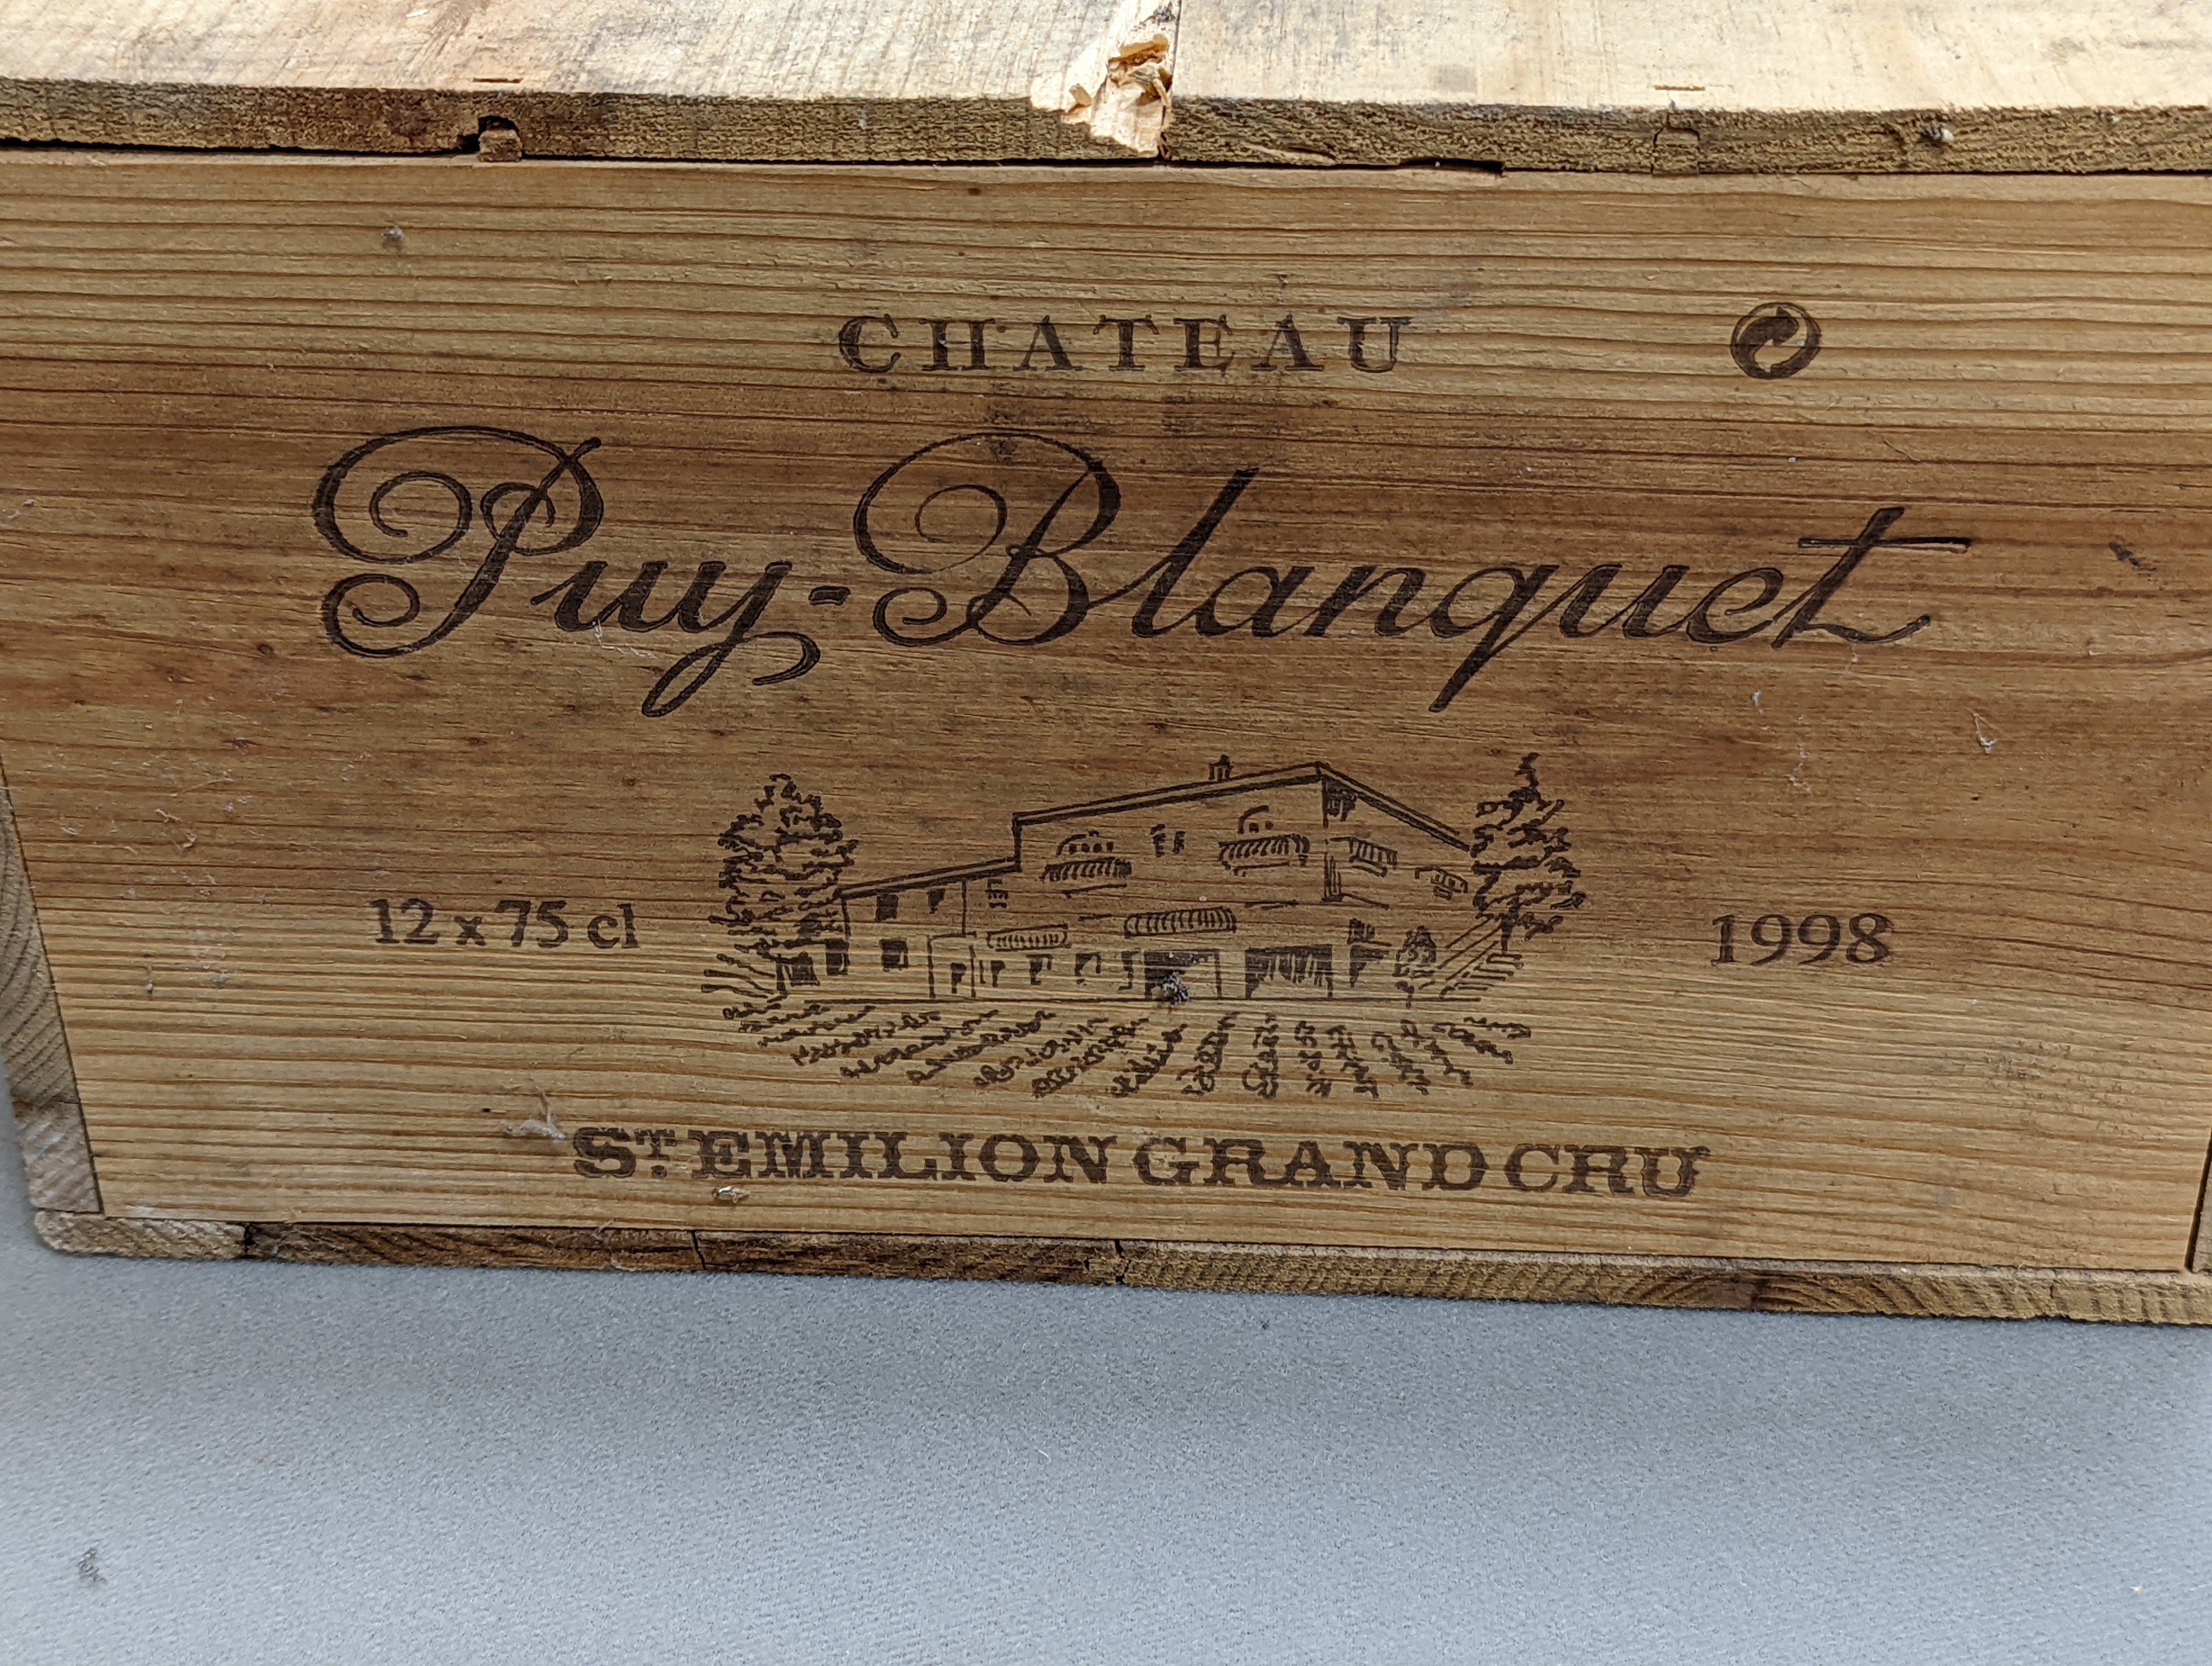 A case of 12 bottles of Chateau Puy Blanquet, 1998, in OWC.